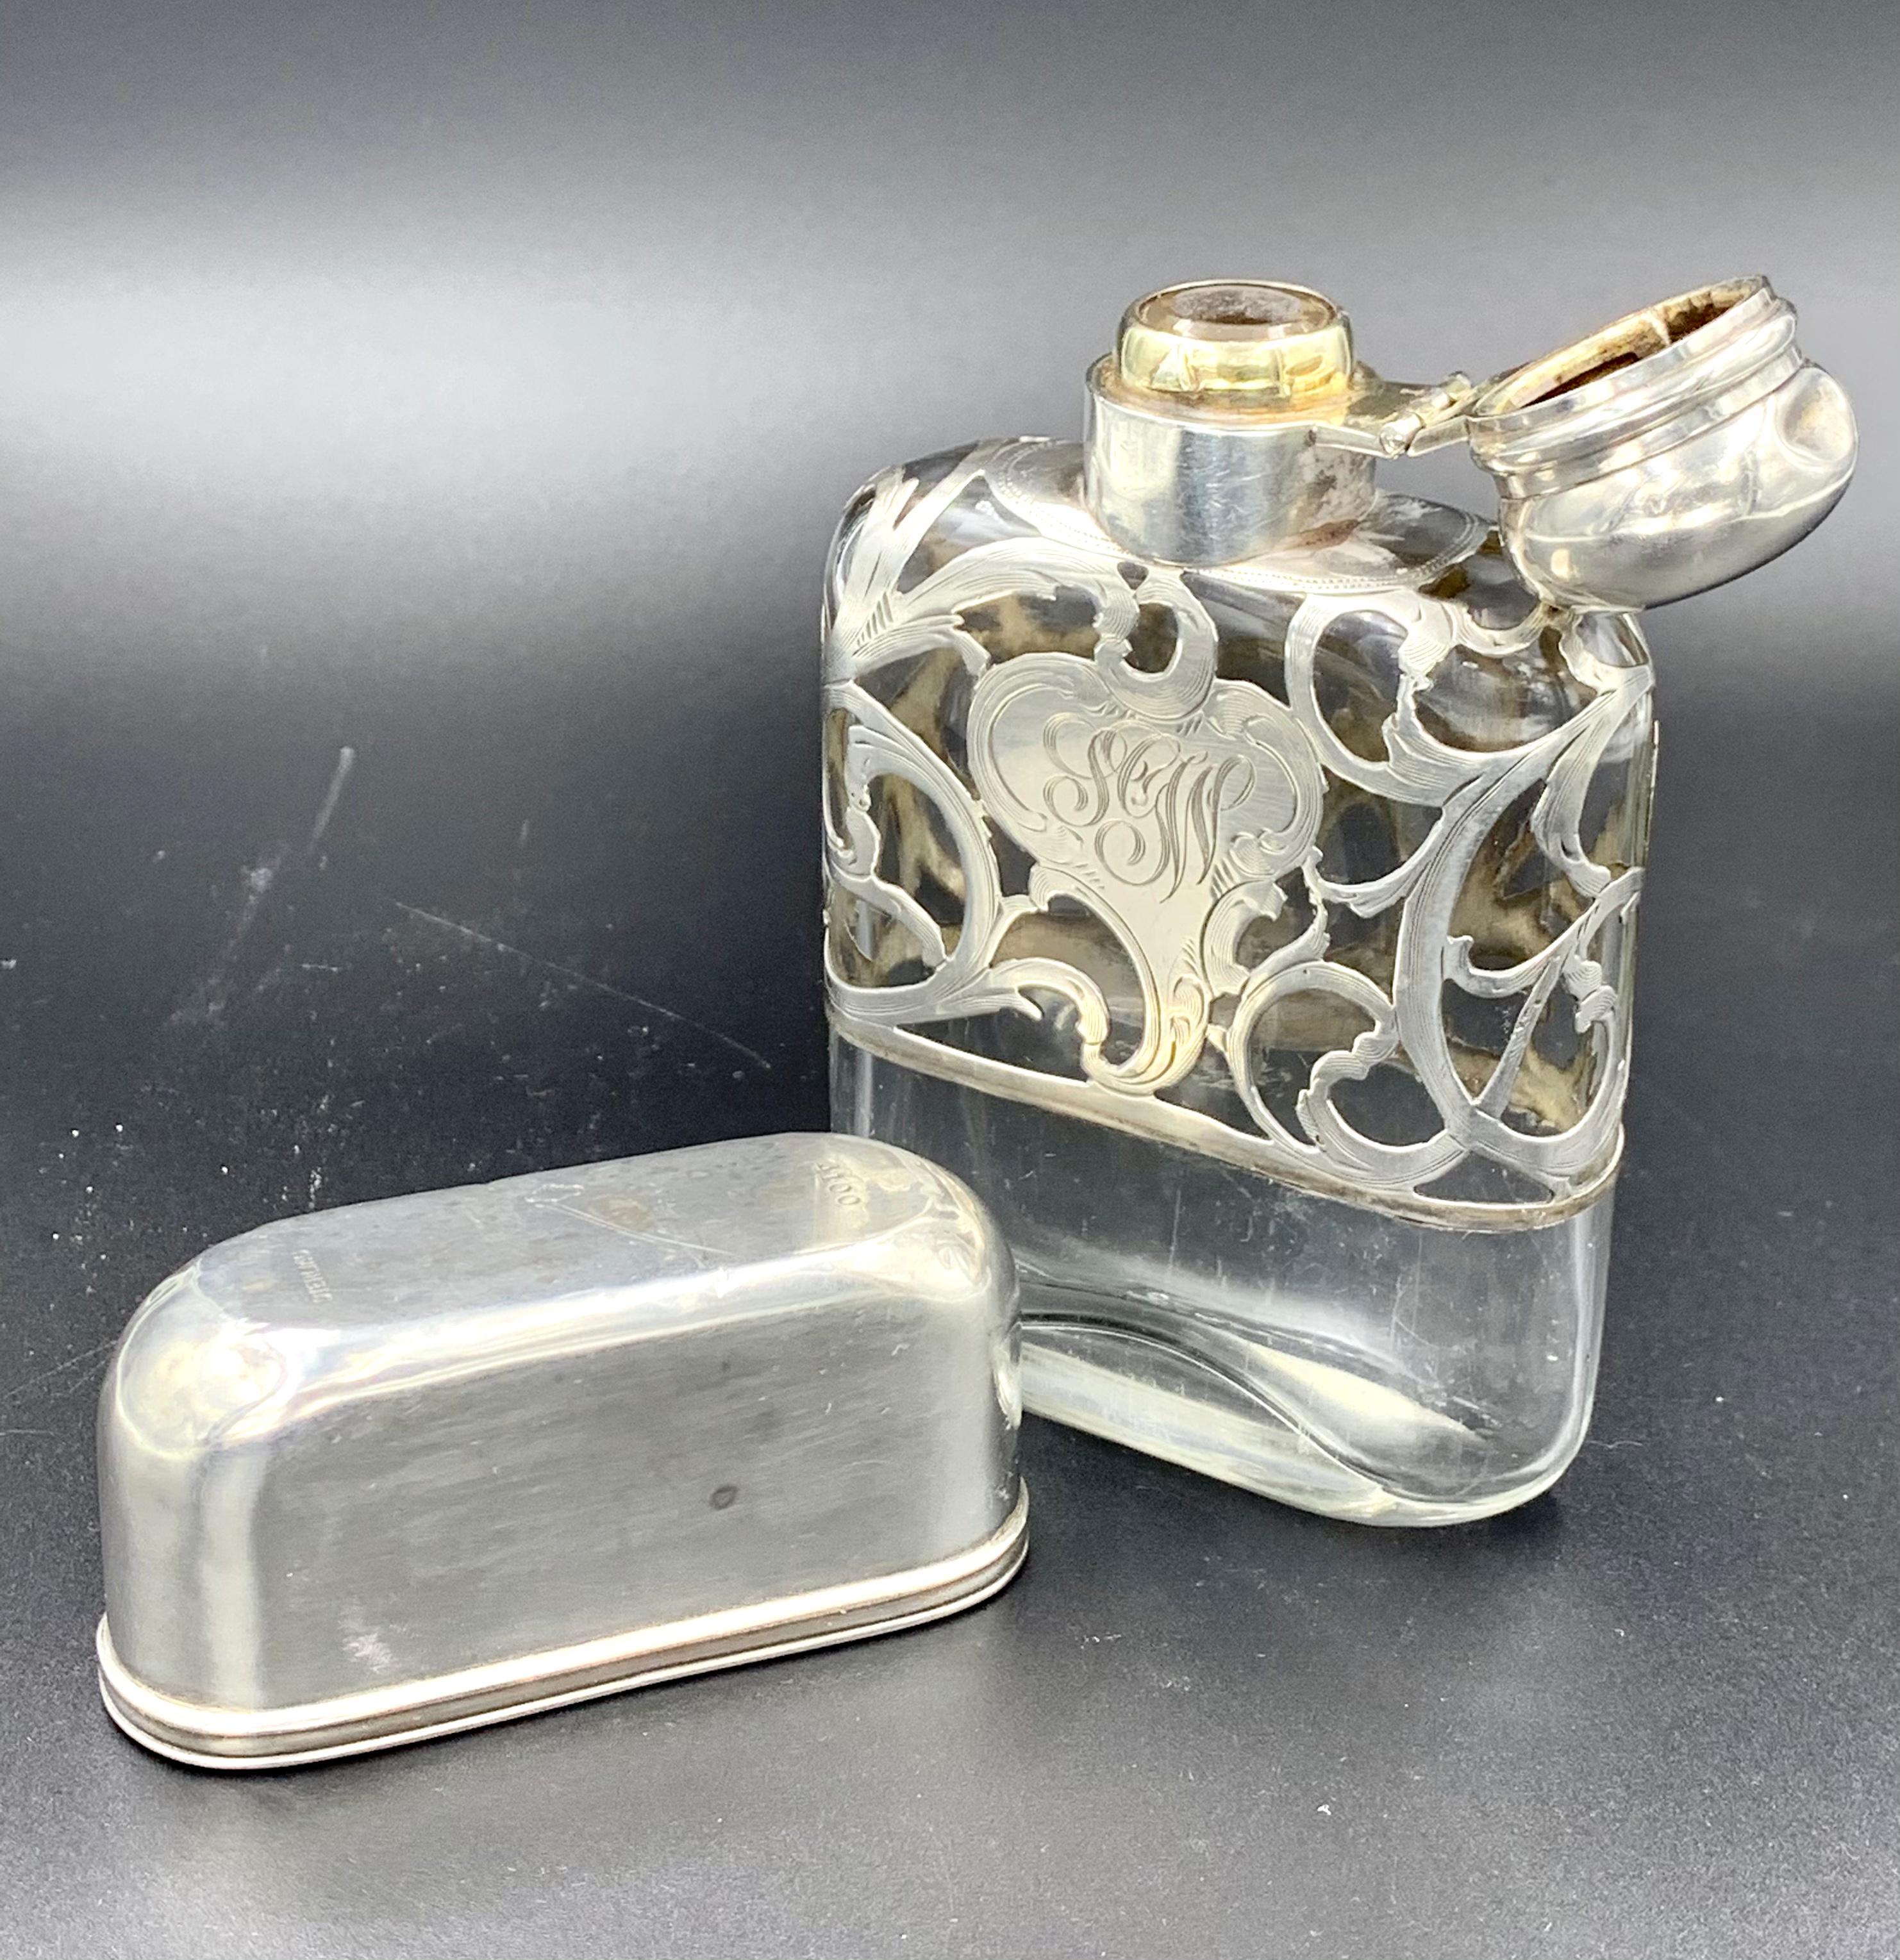 American Antique Art Nouveau Sterling Silver Overlay Flask by Alvin